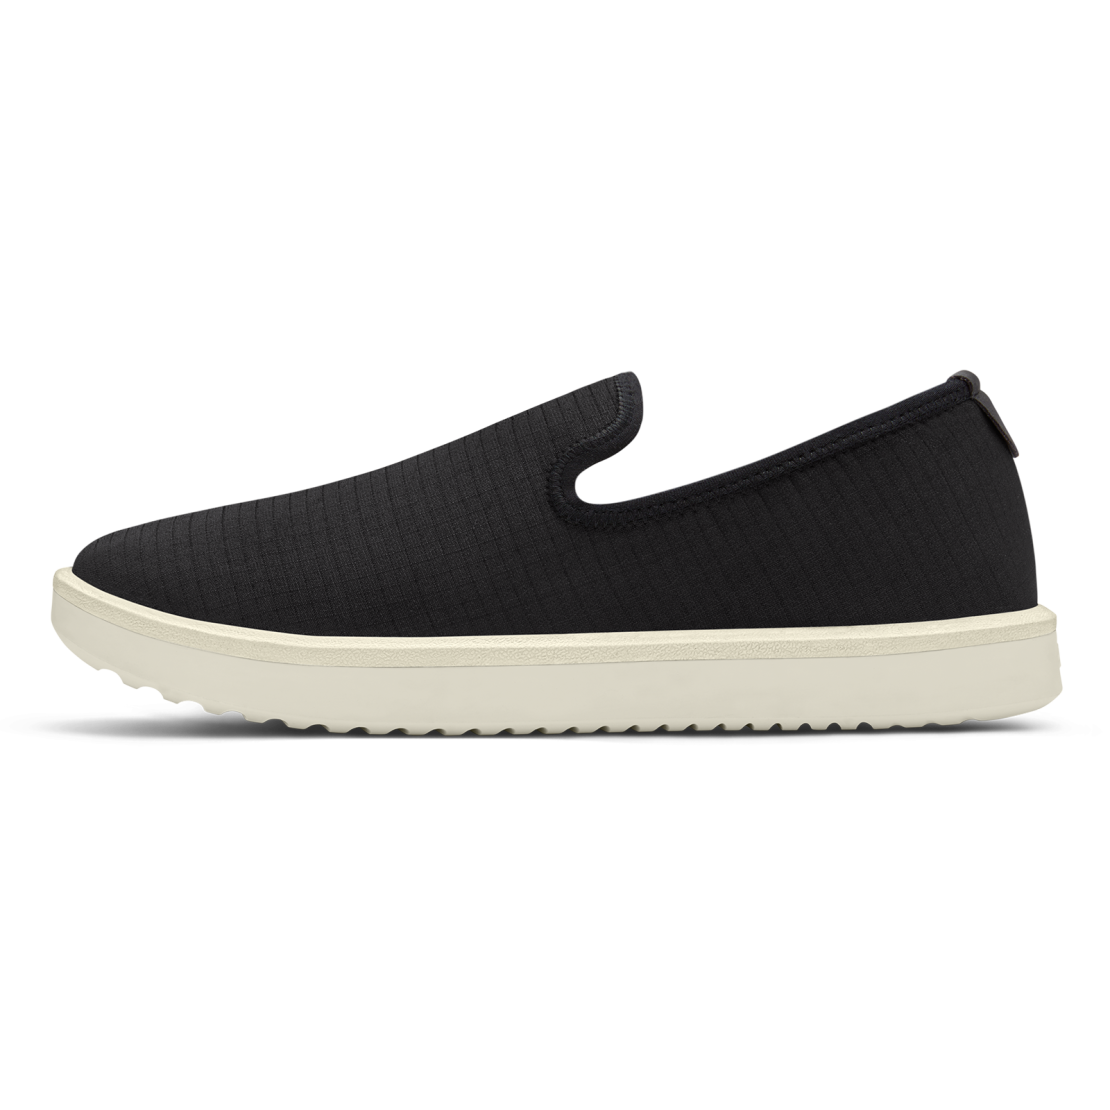 Men's Wool Lounger Woven - Natural Black (Natural White Sole)